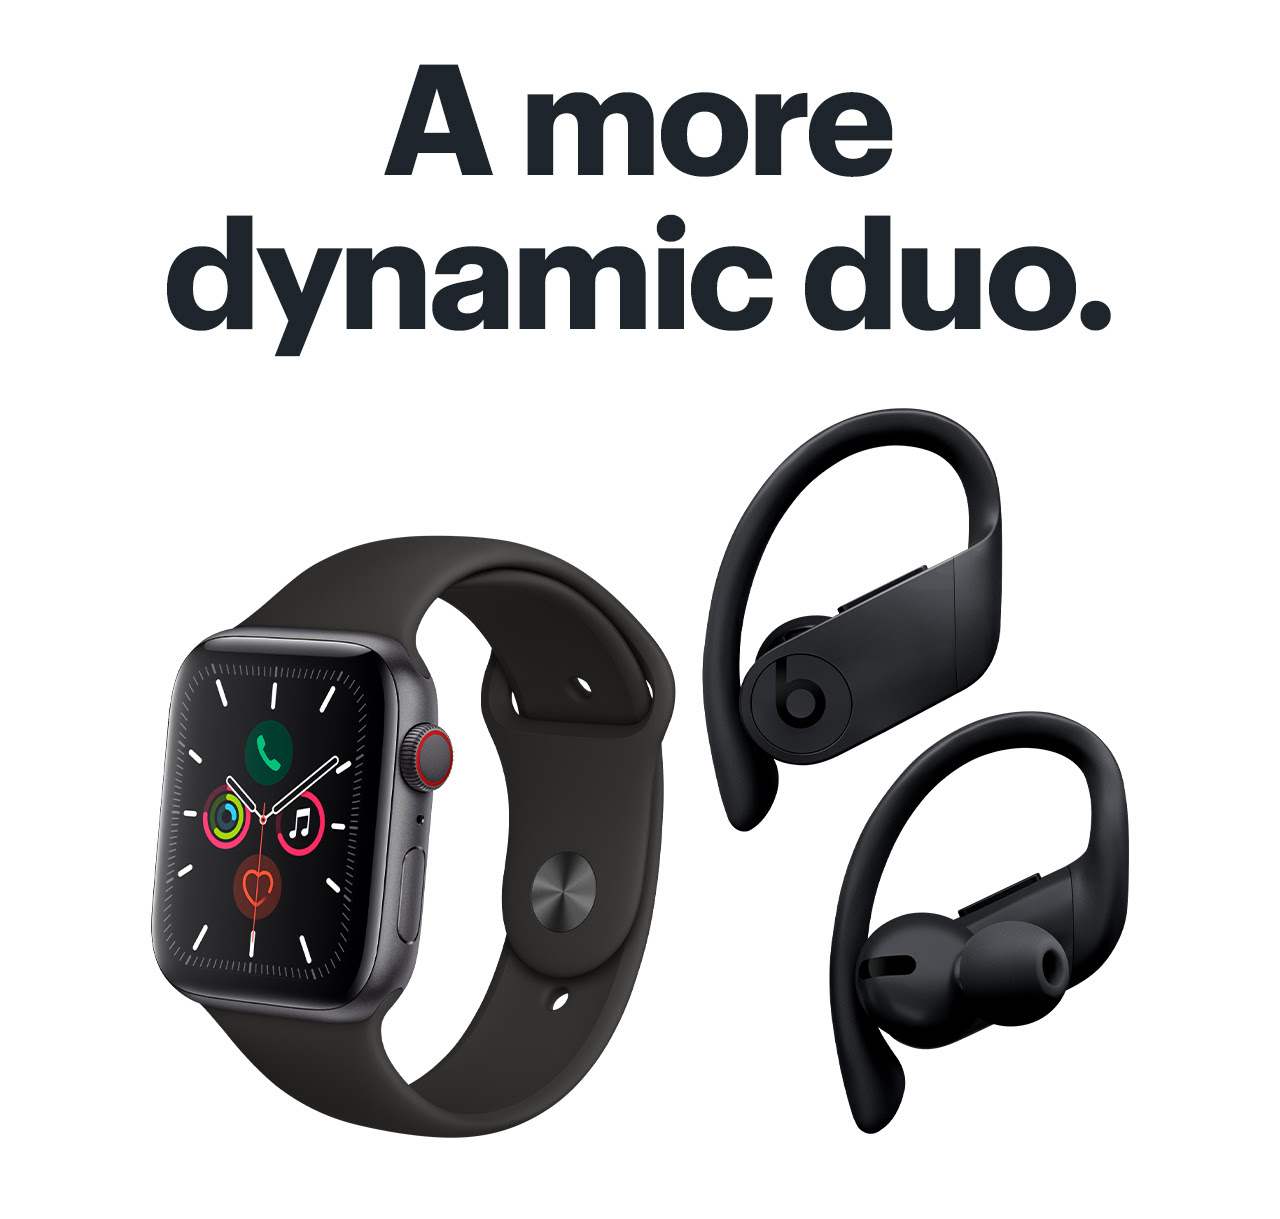 Buy an Apple Watch and save $50 on Powerbeats Pro. 